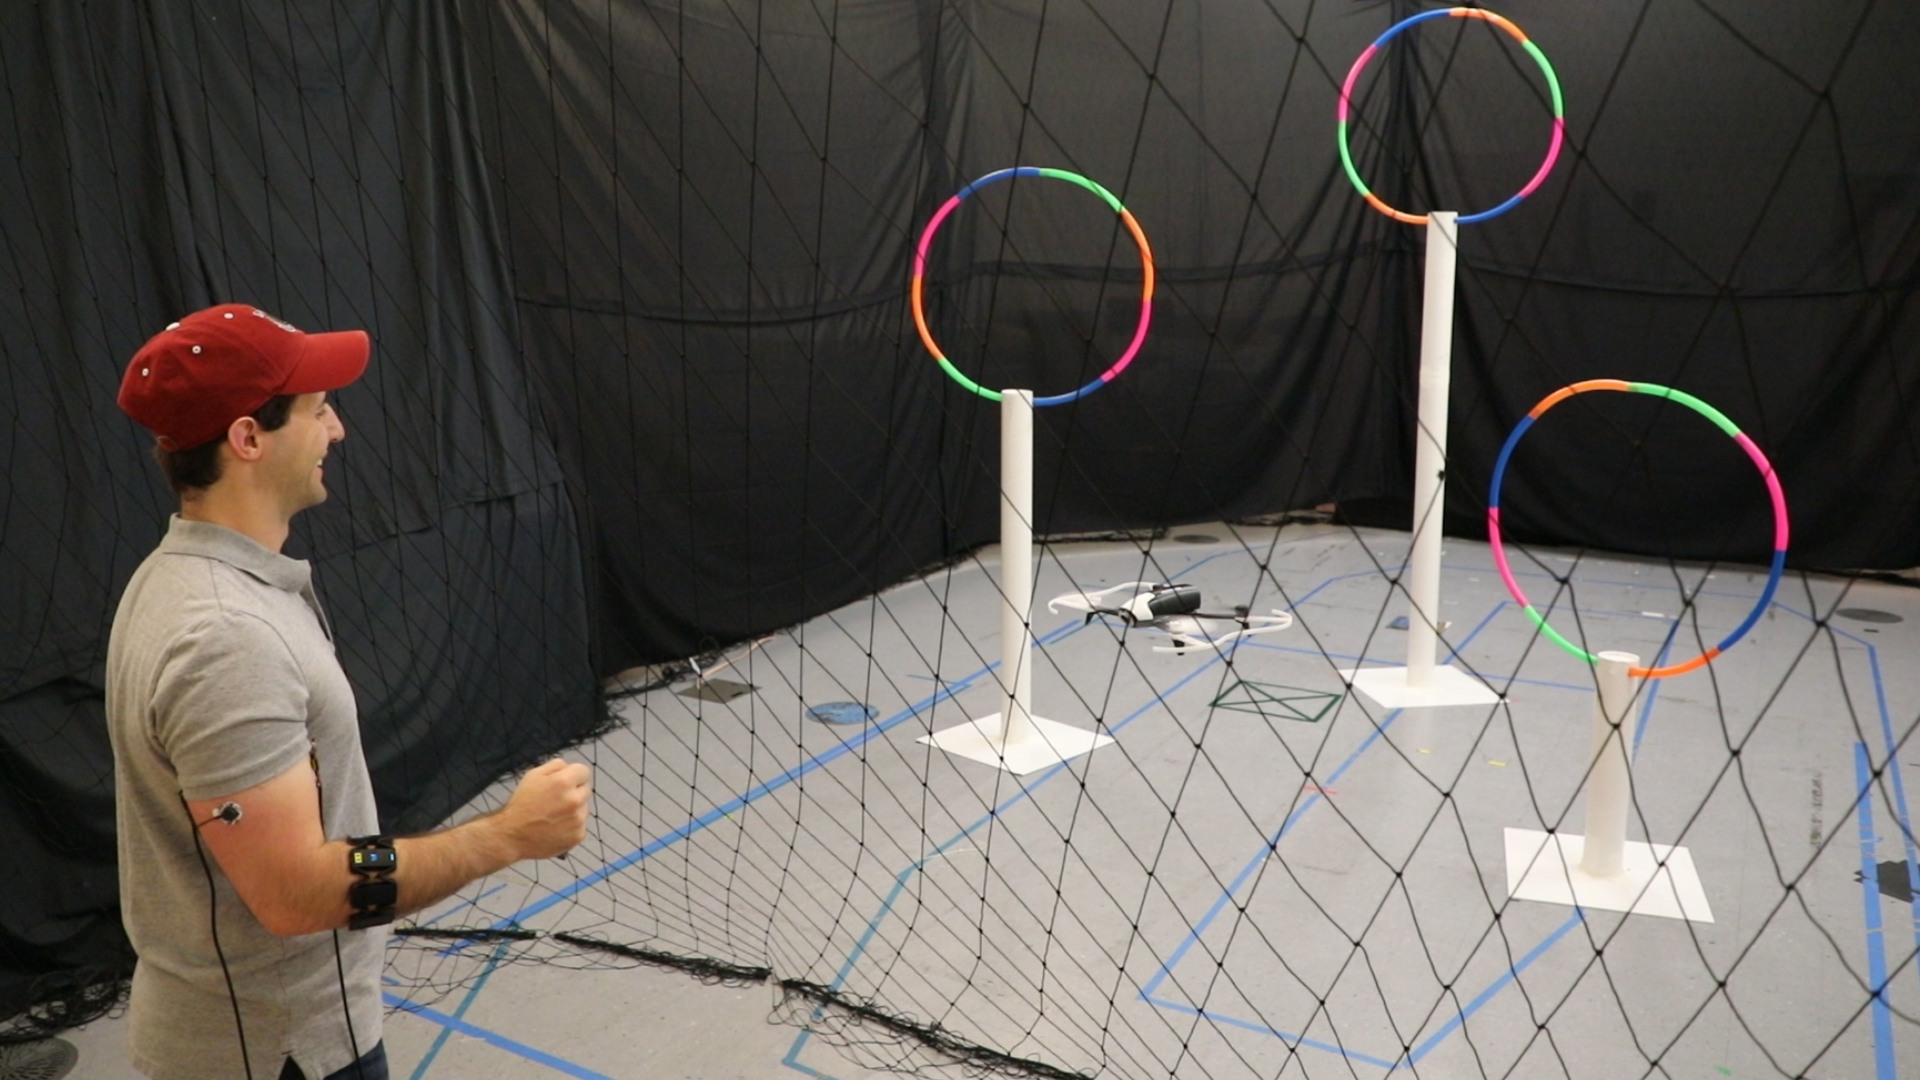 Pilot a drone through hoops using gestures and wearable sensors